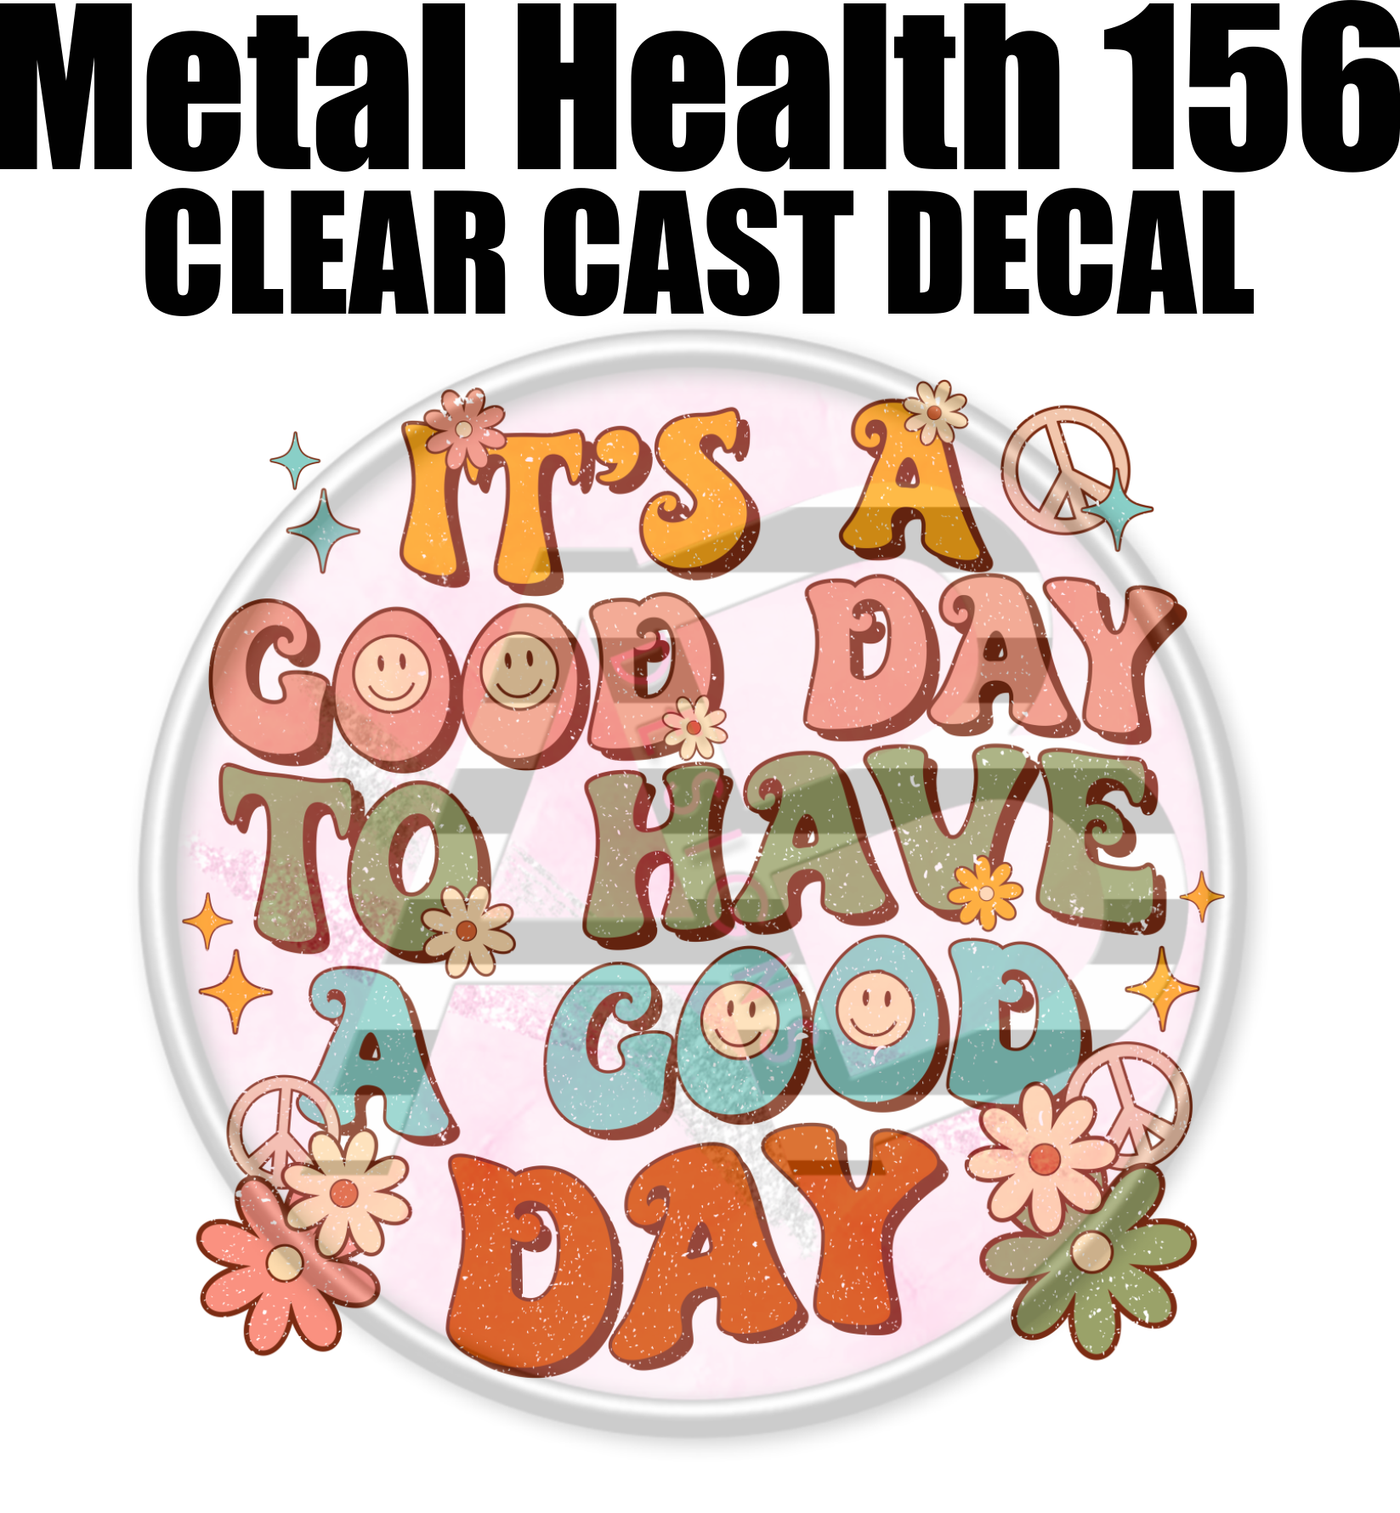 Mental Health 156 - Clear Cast Decal-625